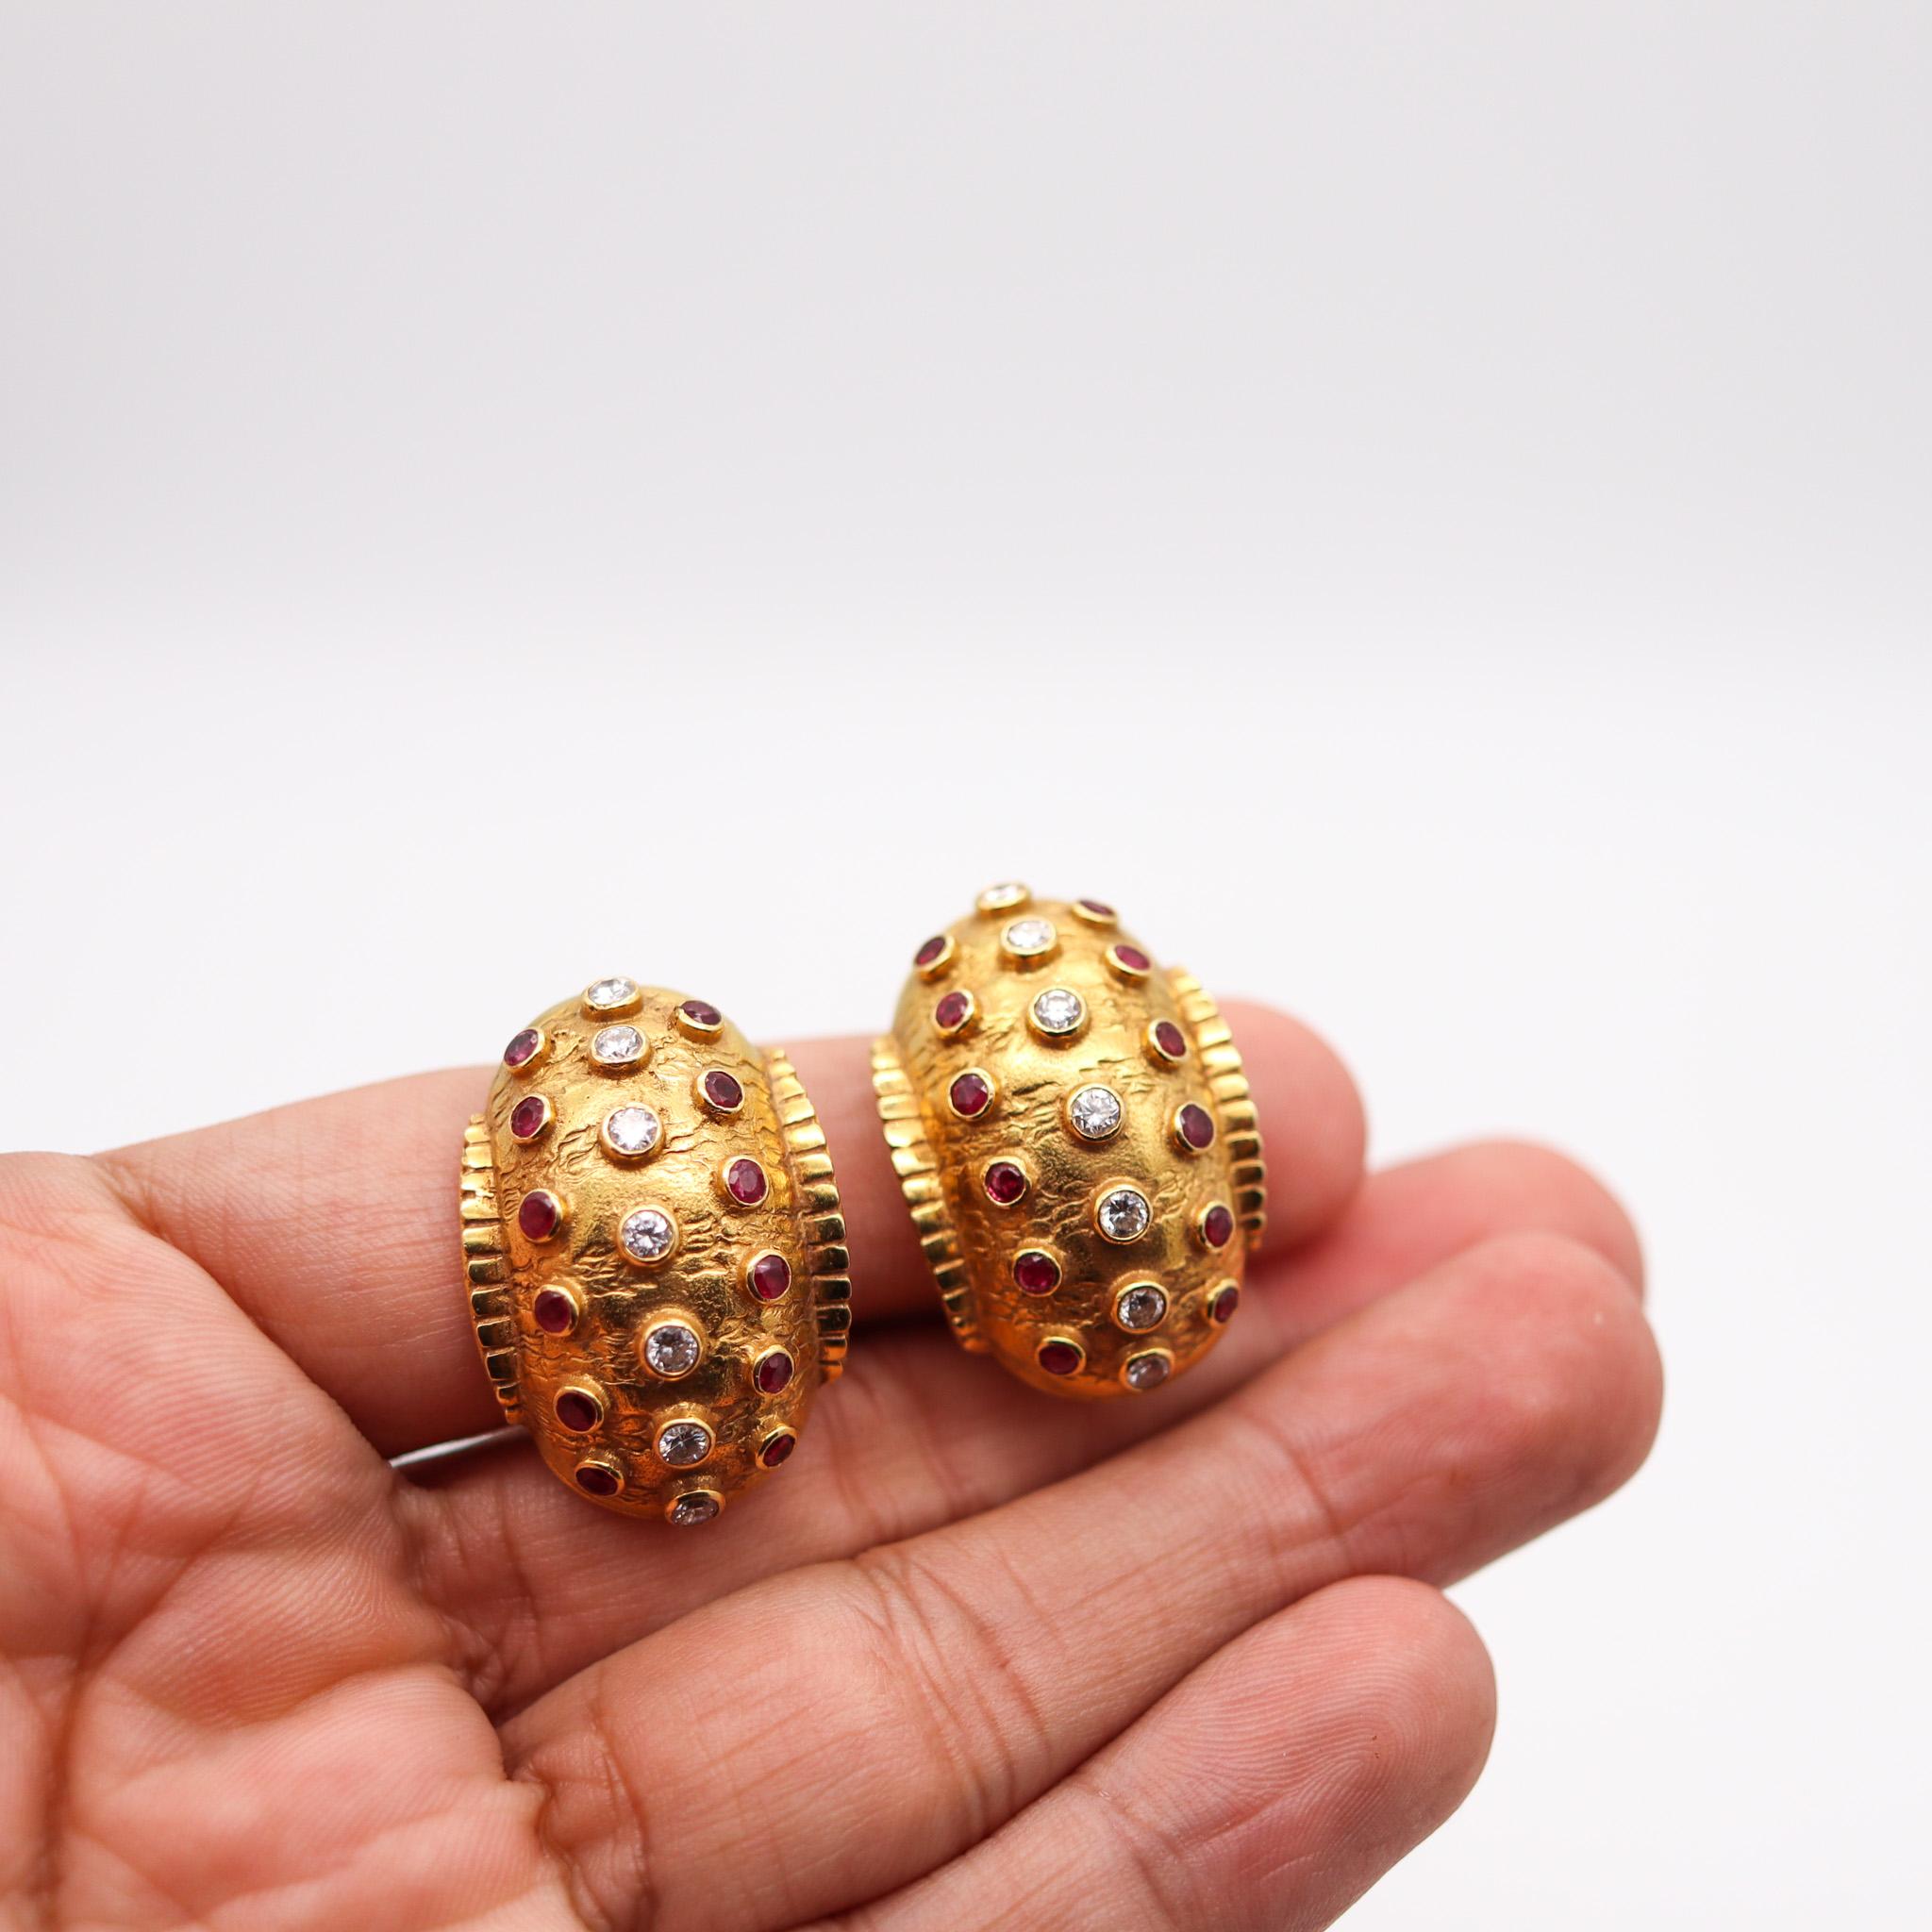 Greek Revival Lalaounis 1970 Clips On Earrings in 18kt Gold With 3.32ctw Diamonds and Rubies